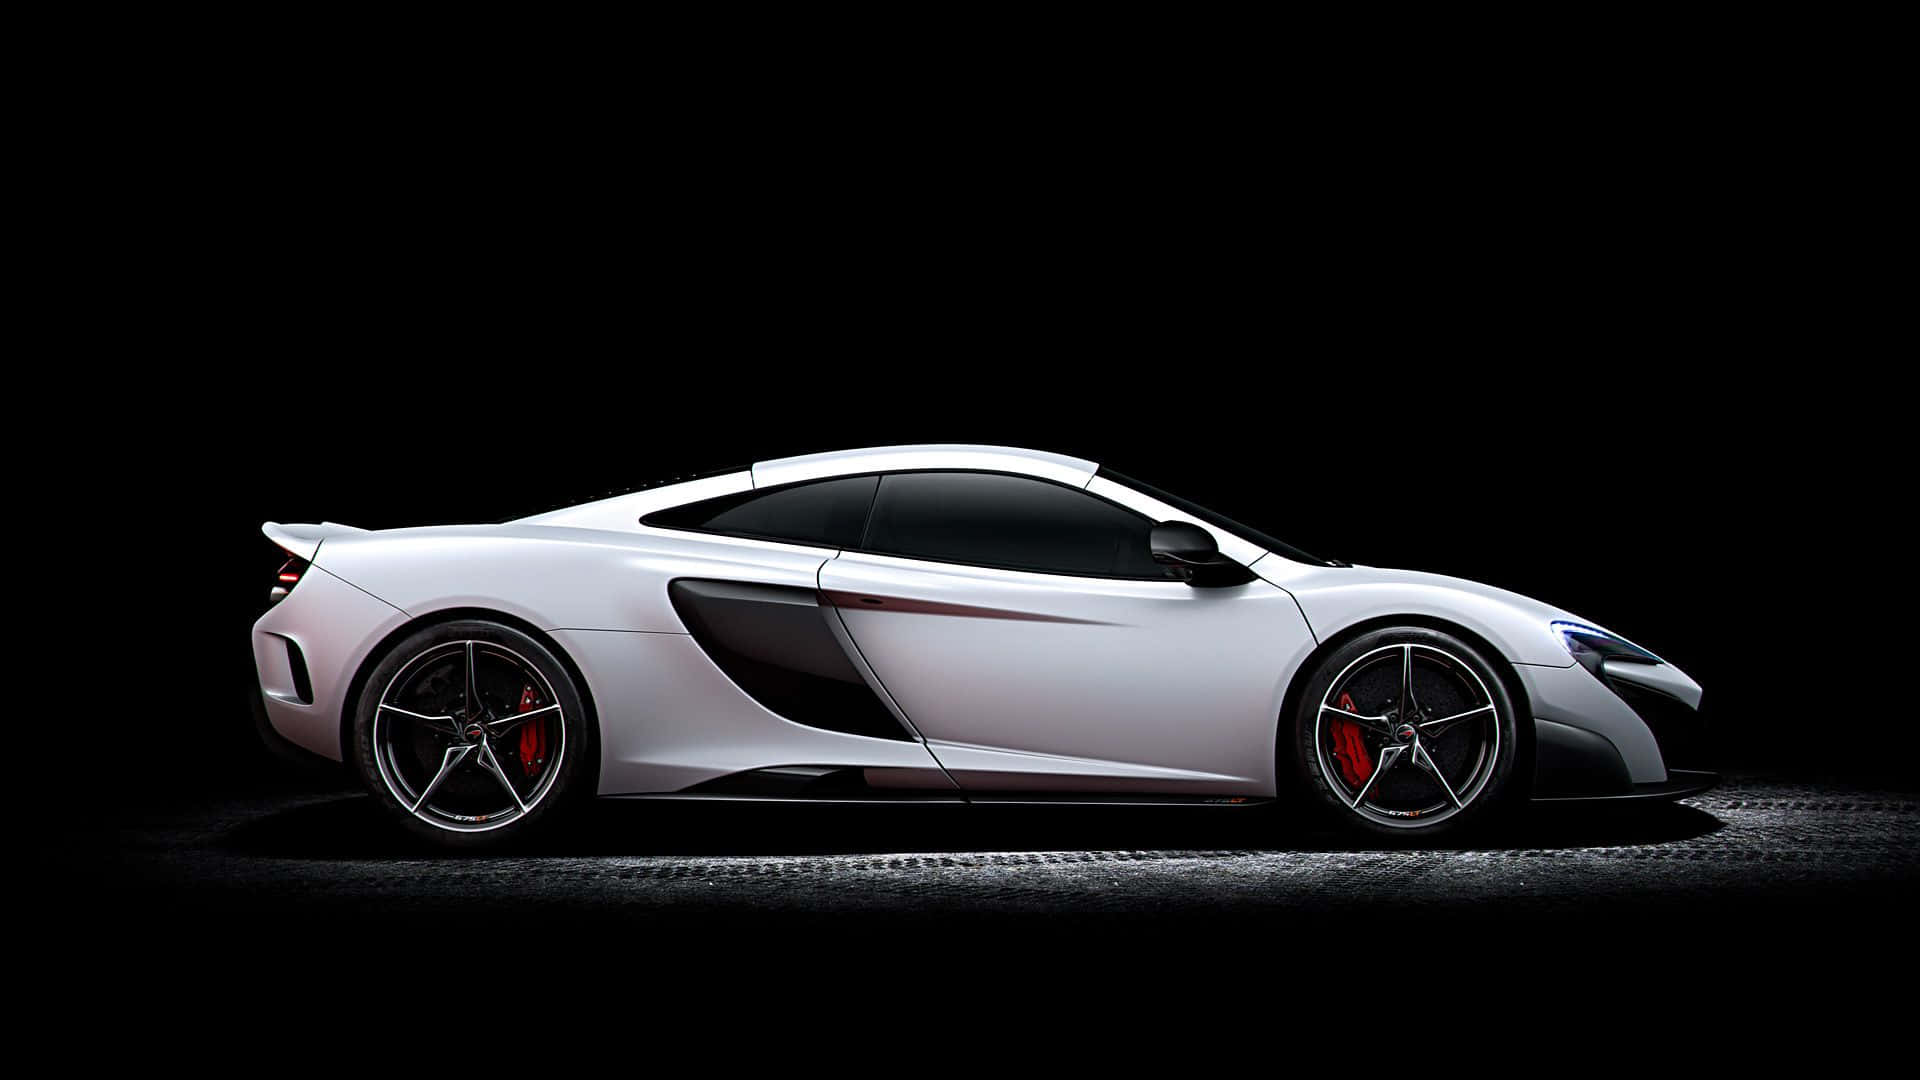 Exceptional Performance Redefined - The Mclaren 675lt Wallpaper